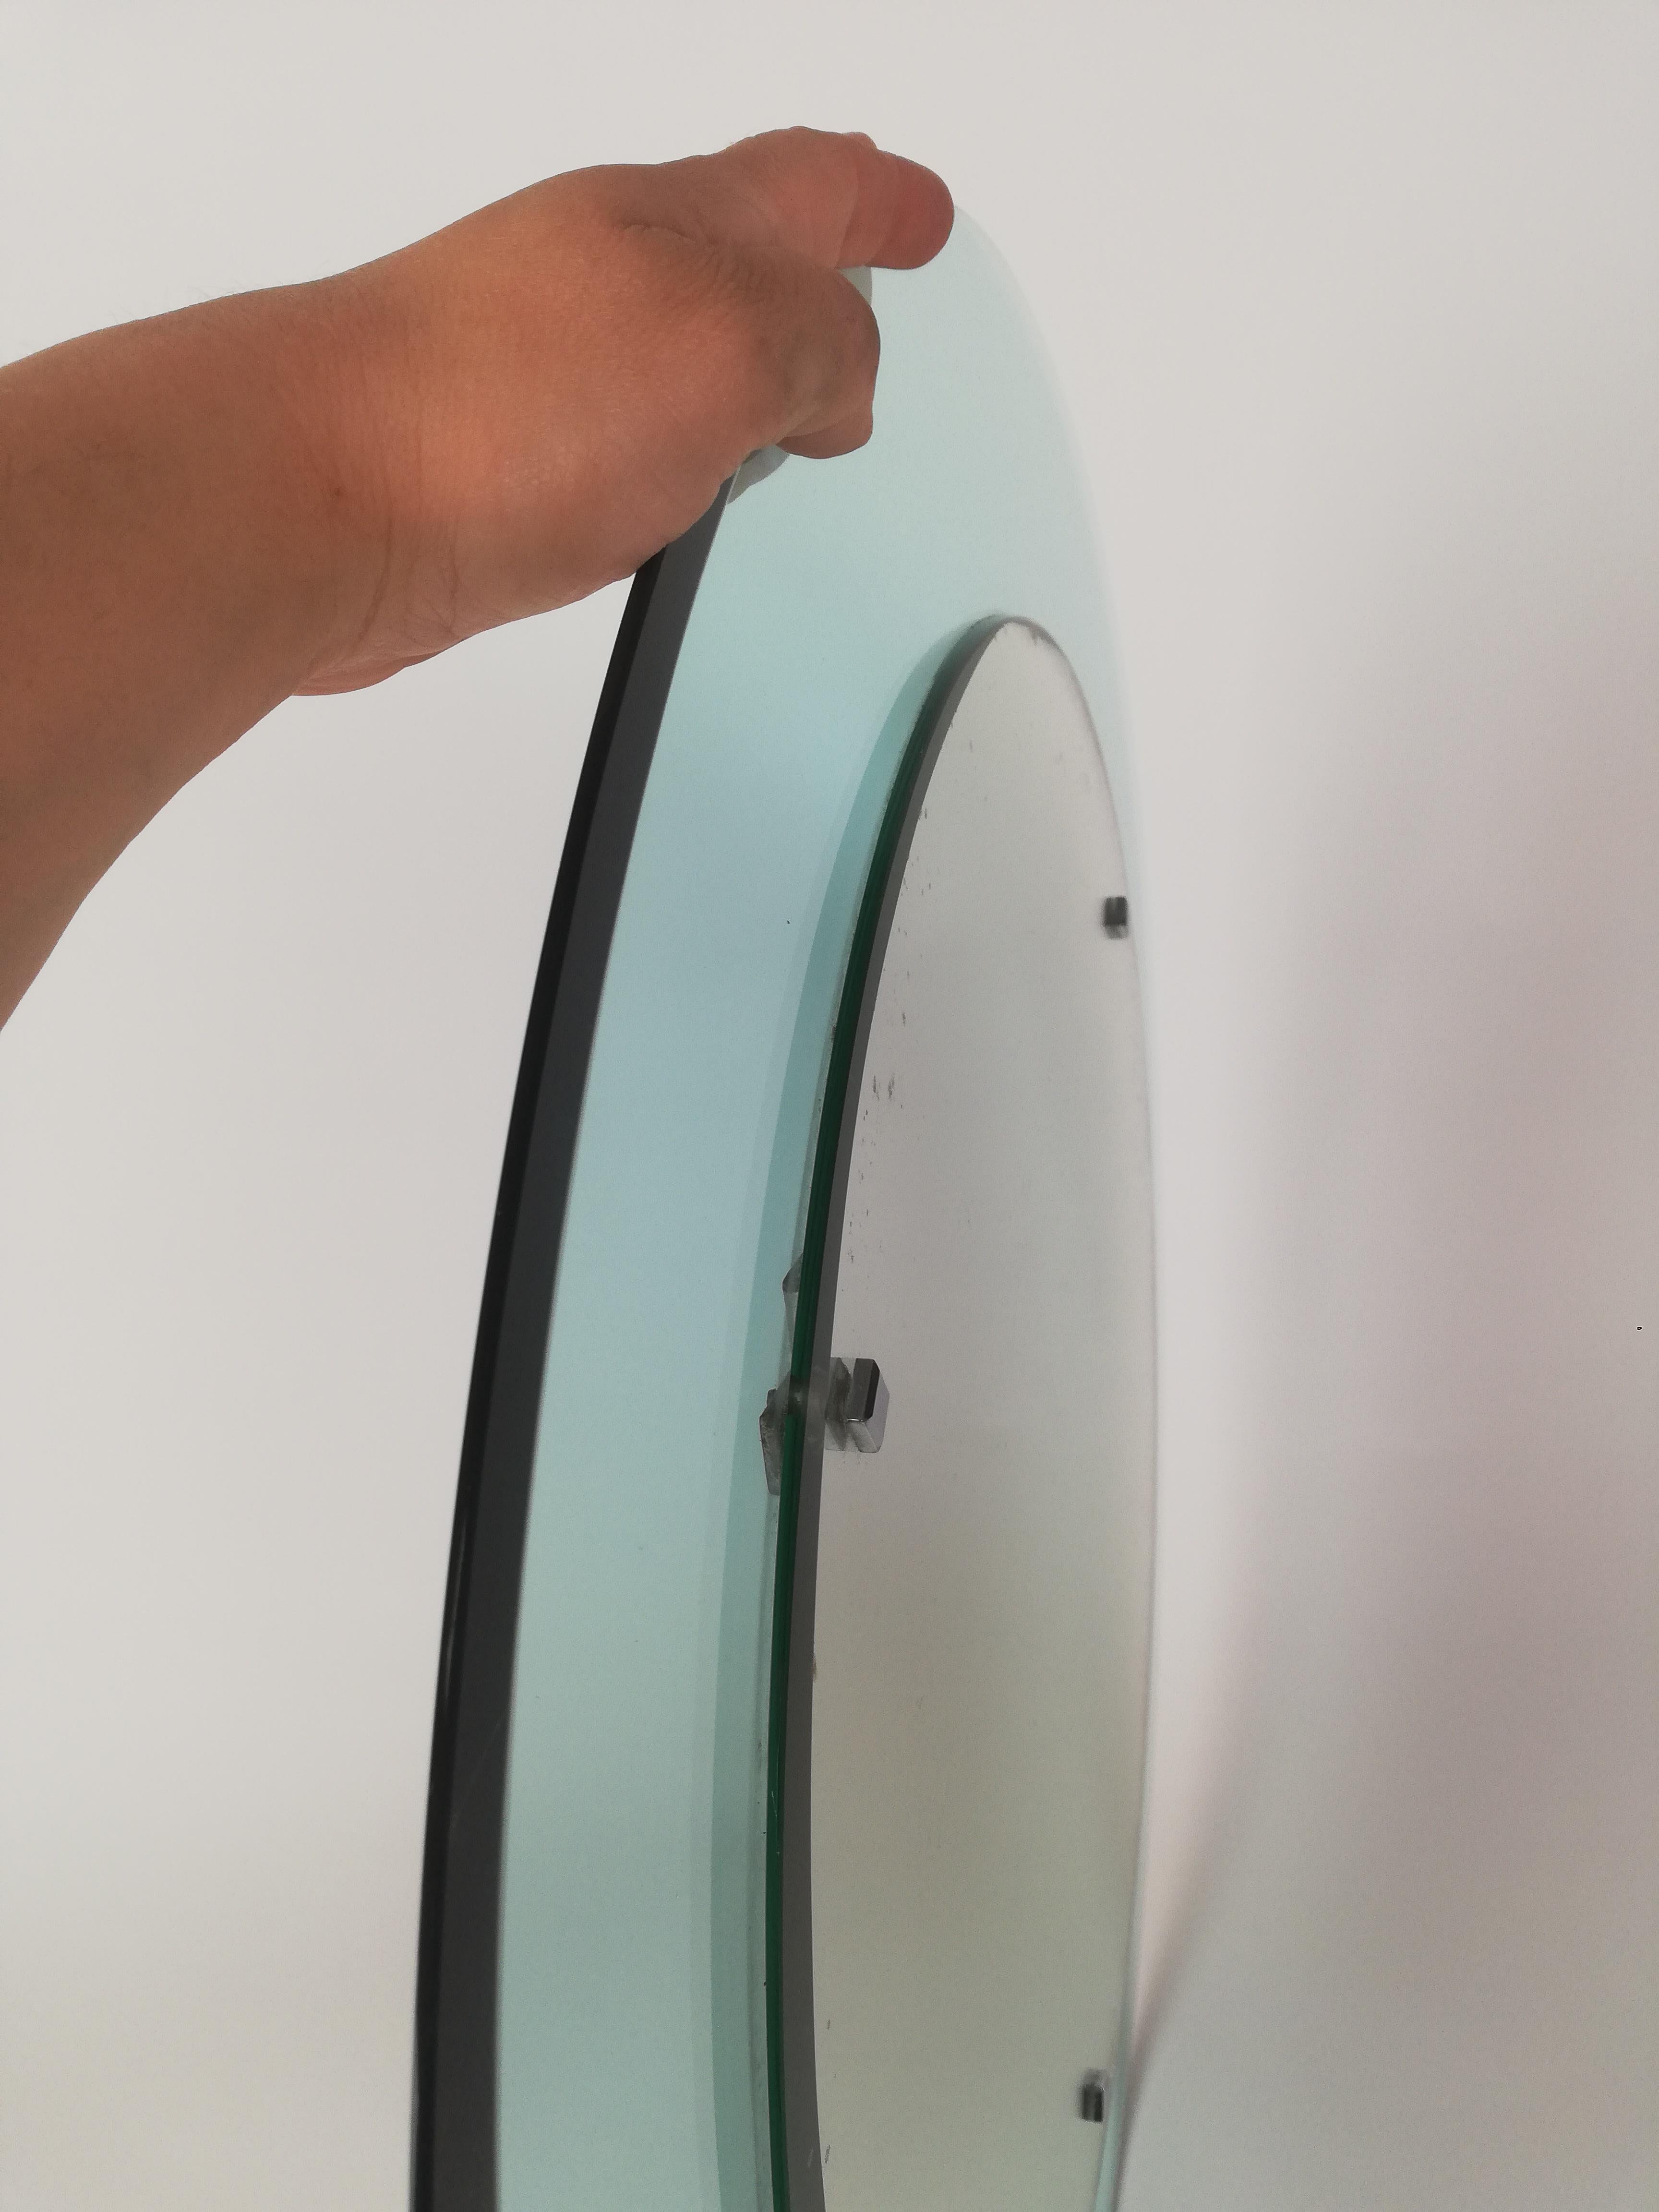 Midcentury Rounded Mirror in Turquois Glass Attributable to Veca, Italy, 1970s For Sale 6